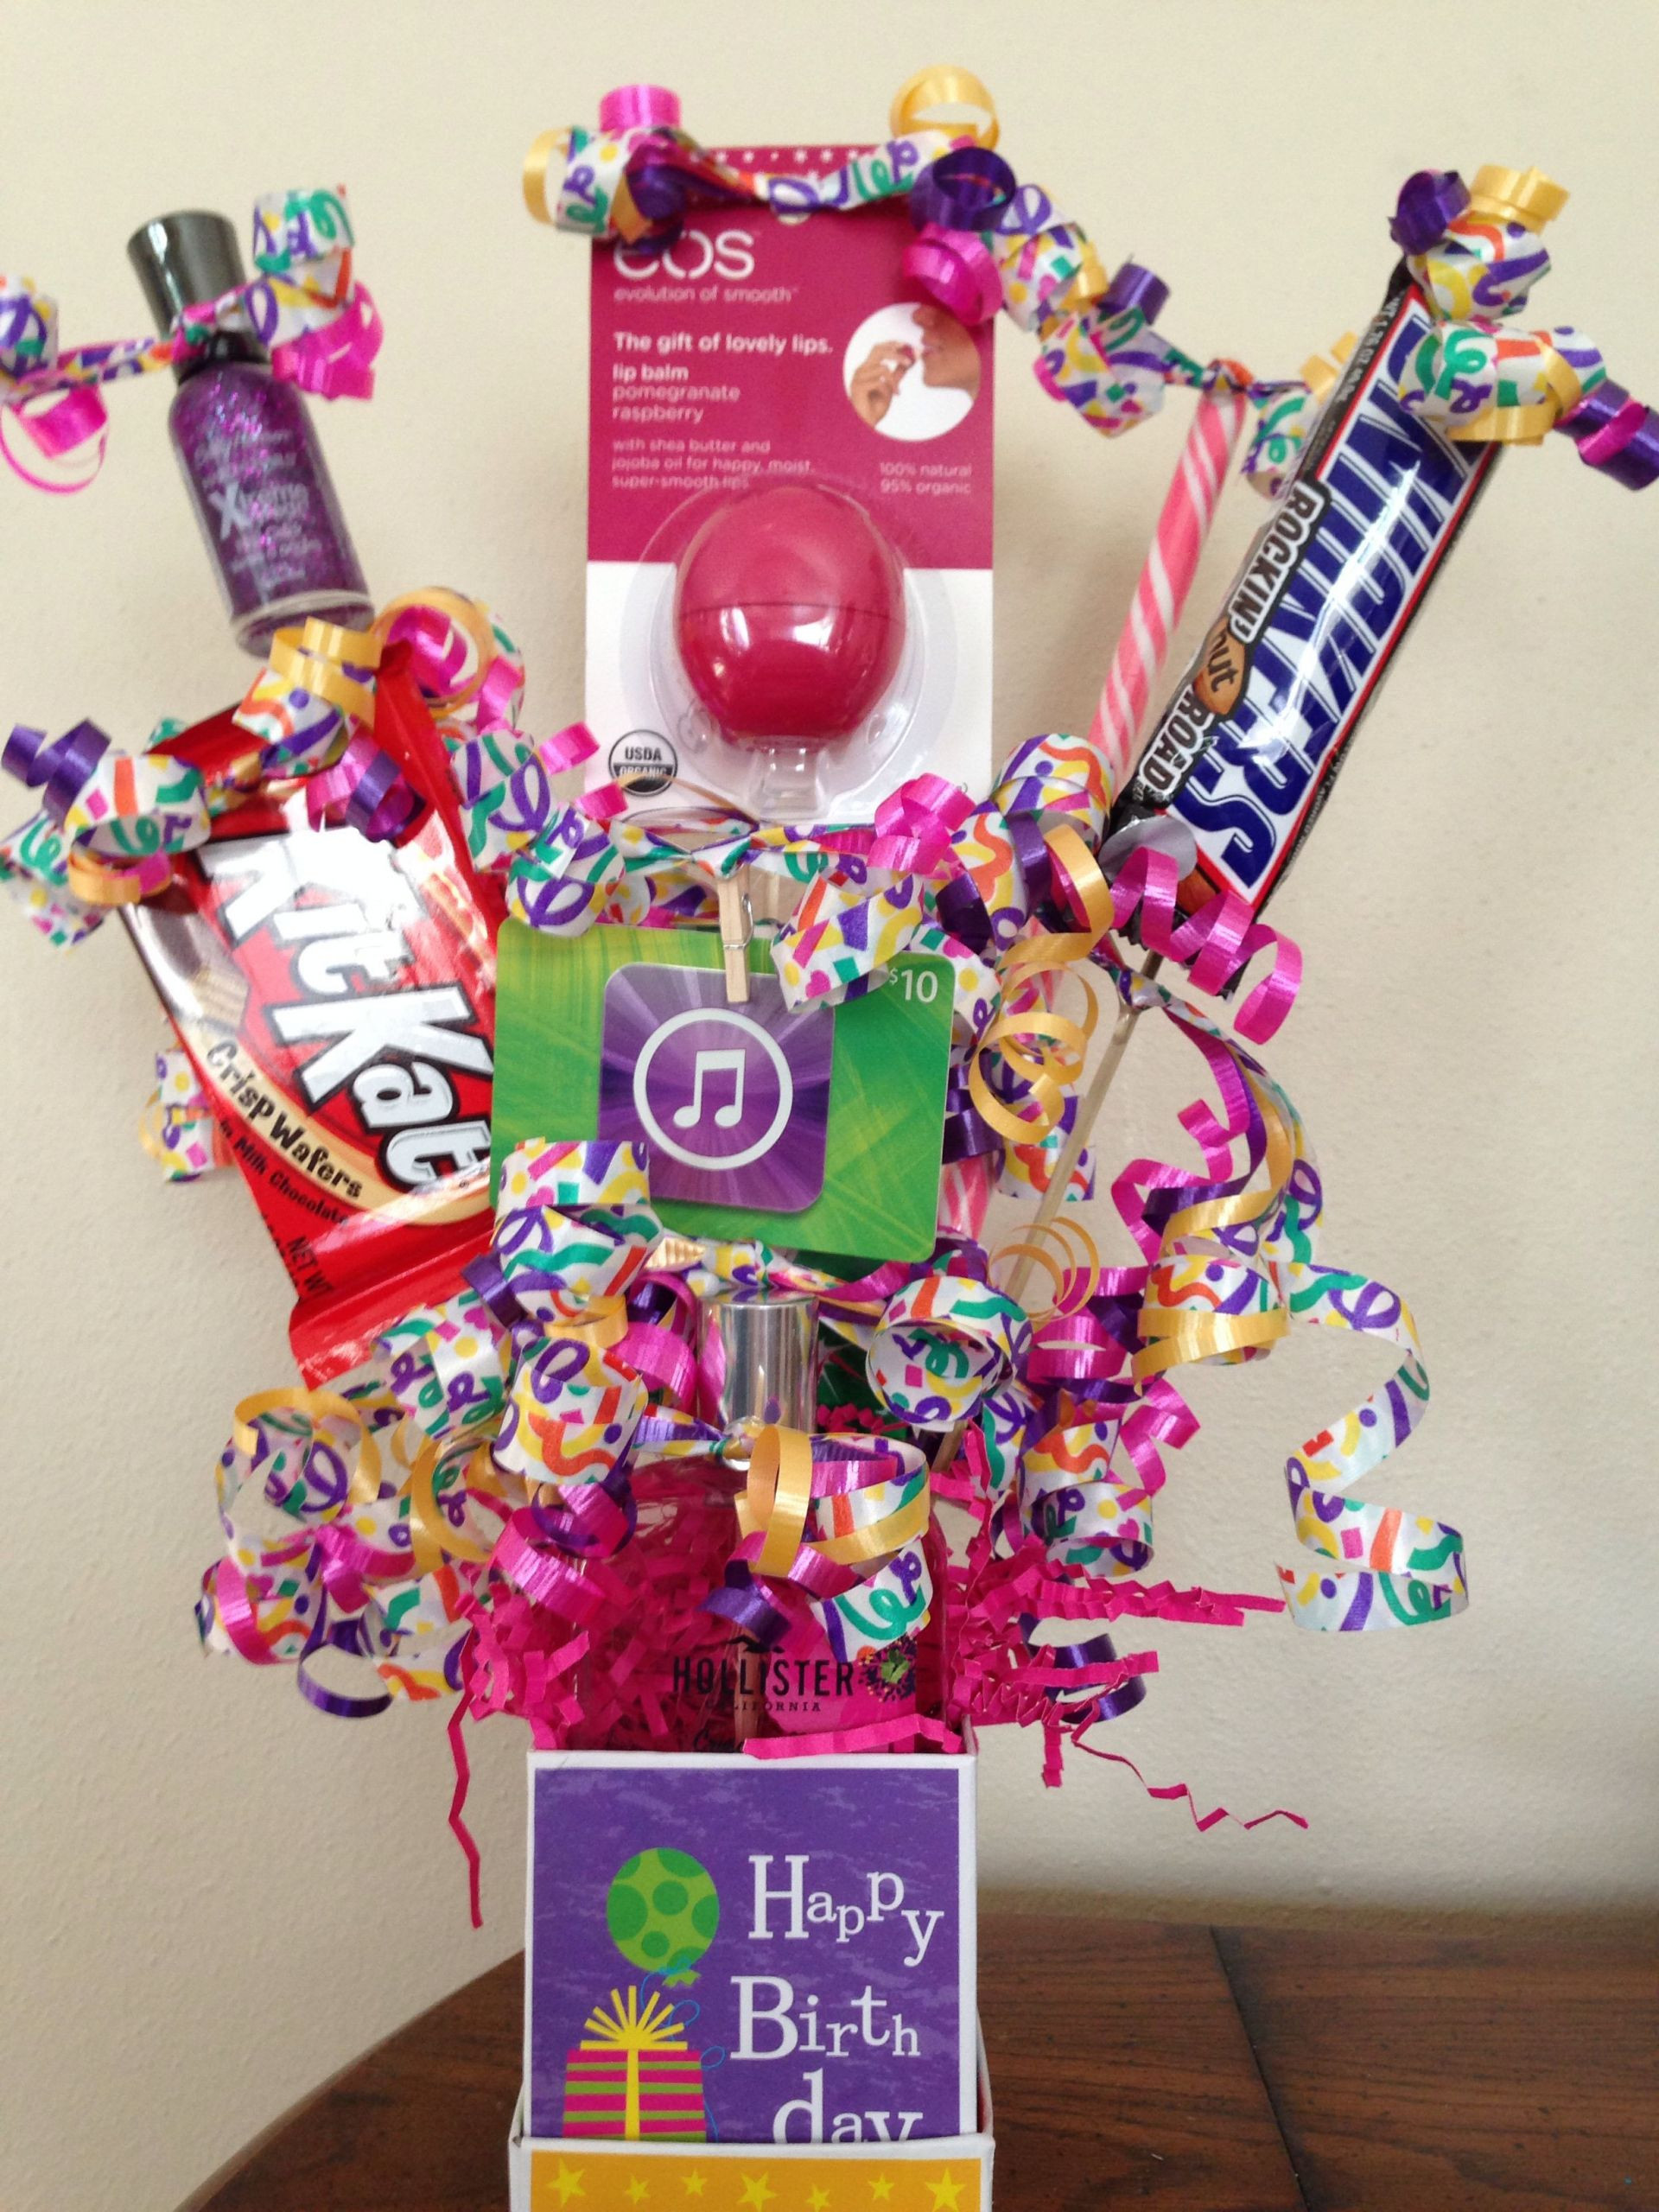 Valentines Gift Ideas For Young Daughter
 22 Best Ideas Gift Basket Ideas for Teenage Girls Home